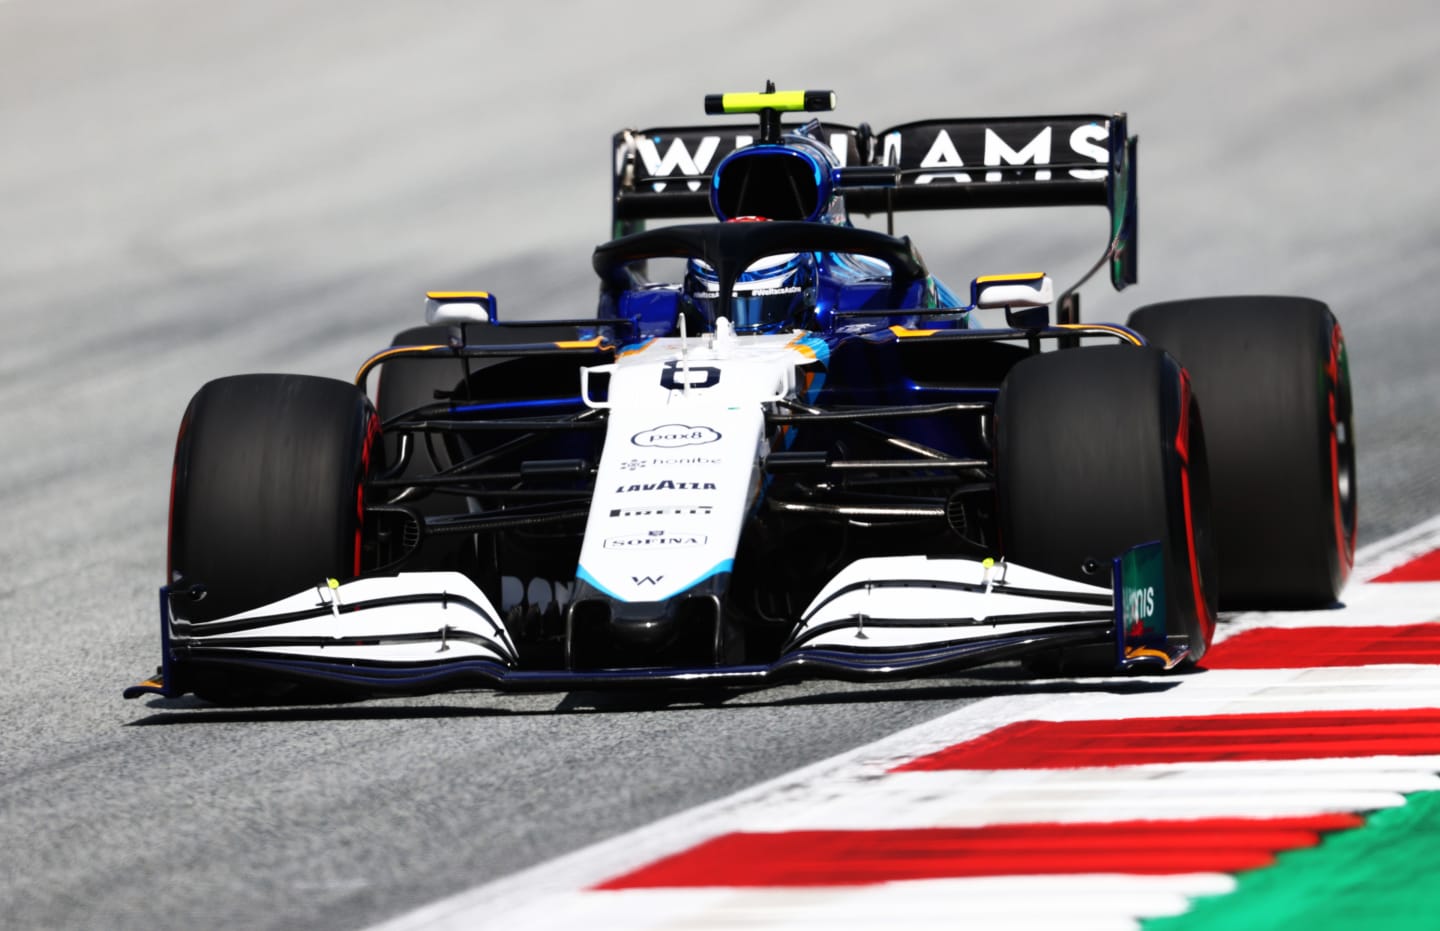 SPIELBERG, AUSTRIA - JUNE 26: Nicholas Latifi of Canada driving the (6) Williams Racing FW43B Mercedes on track during qualifying ahead of the F1 Grand Prix of Styria at Red Bull Ring on June 26, 2021 in Spielberg, Austria. (Photo by Clive Rose/Getty Images)